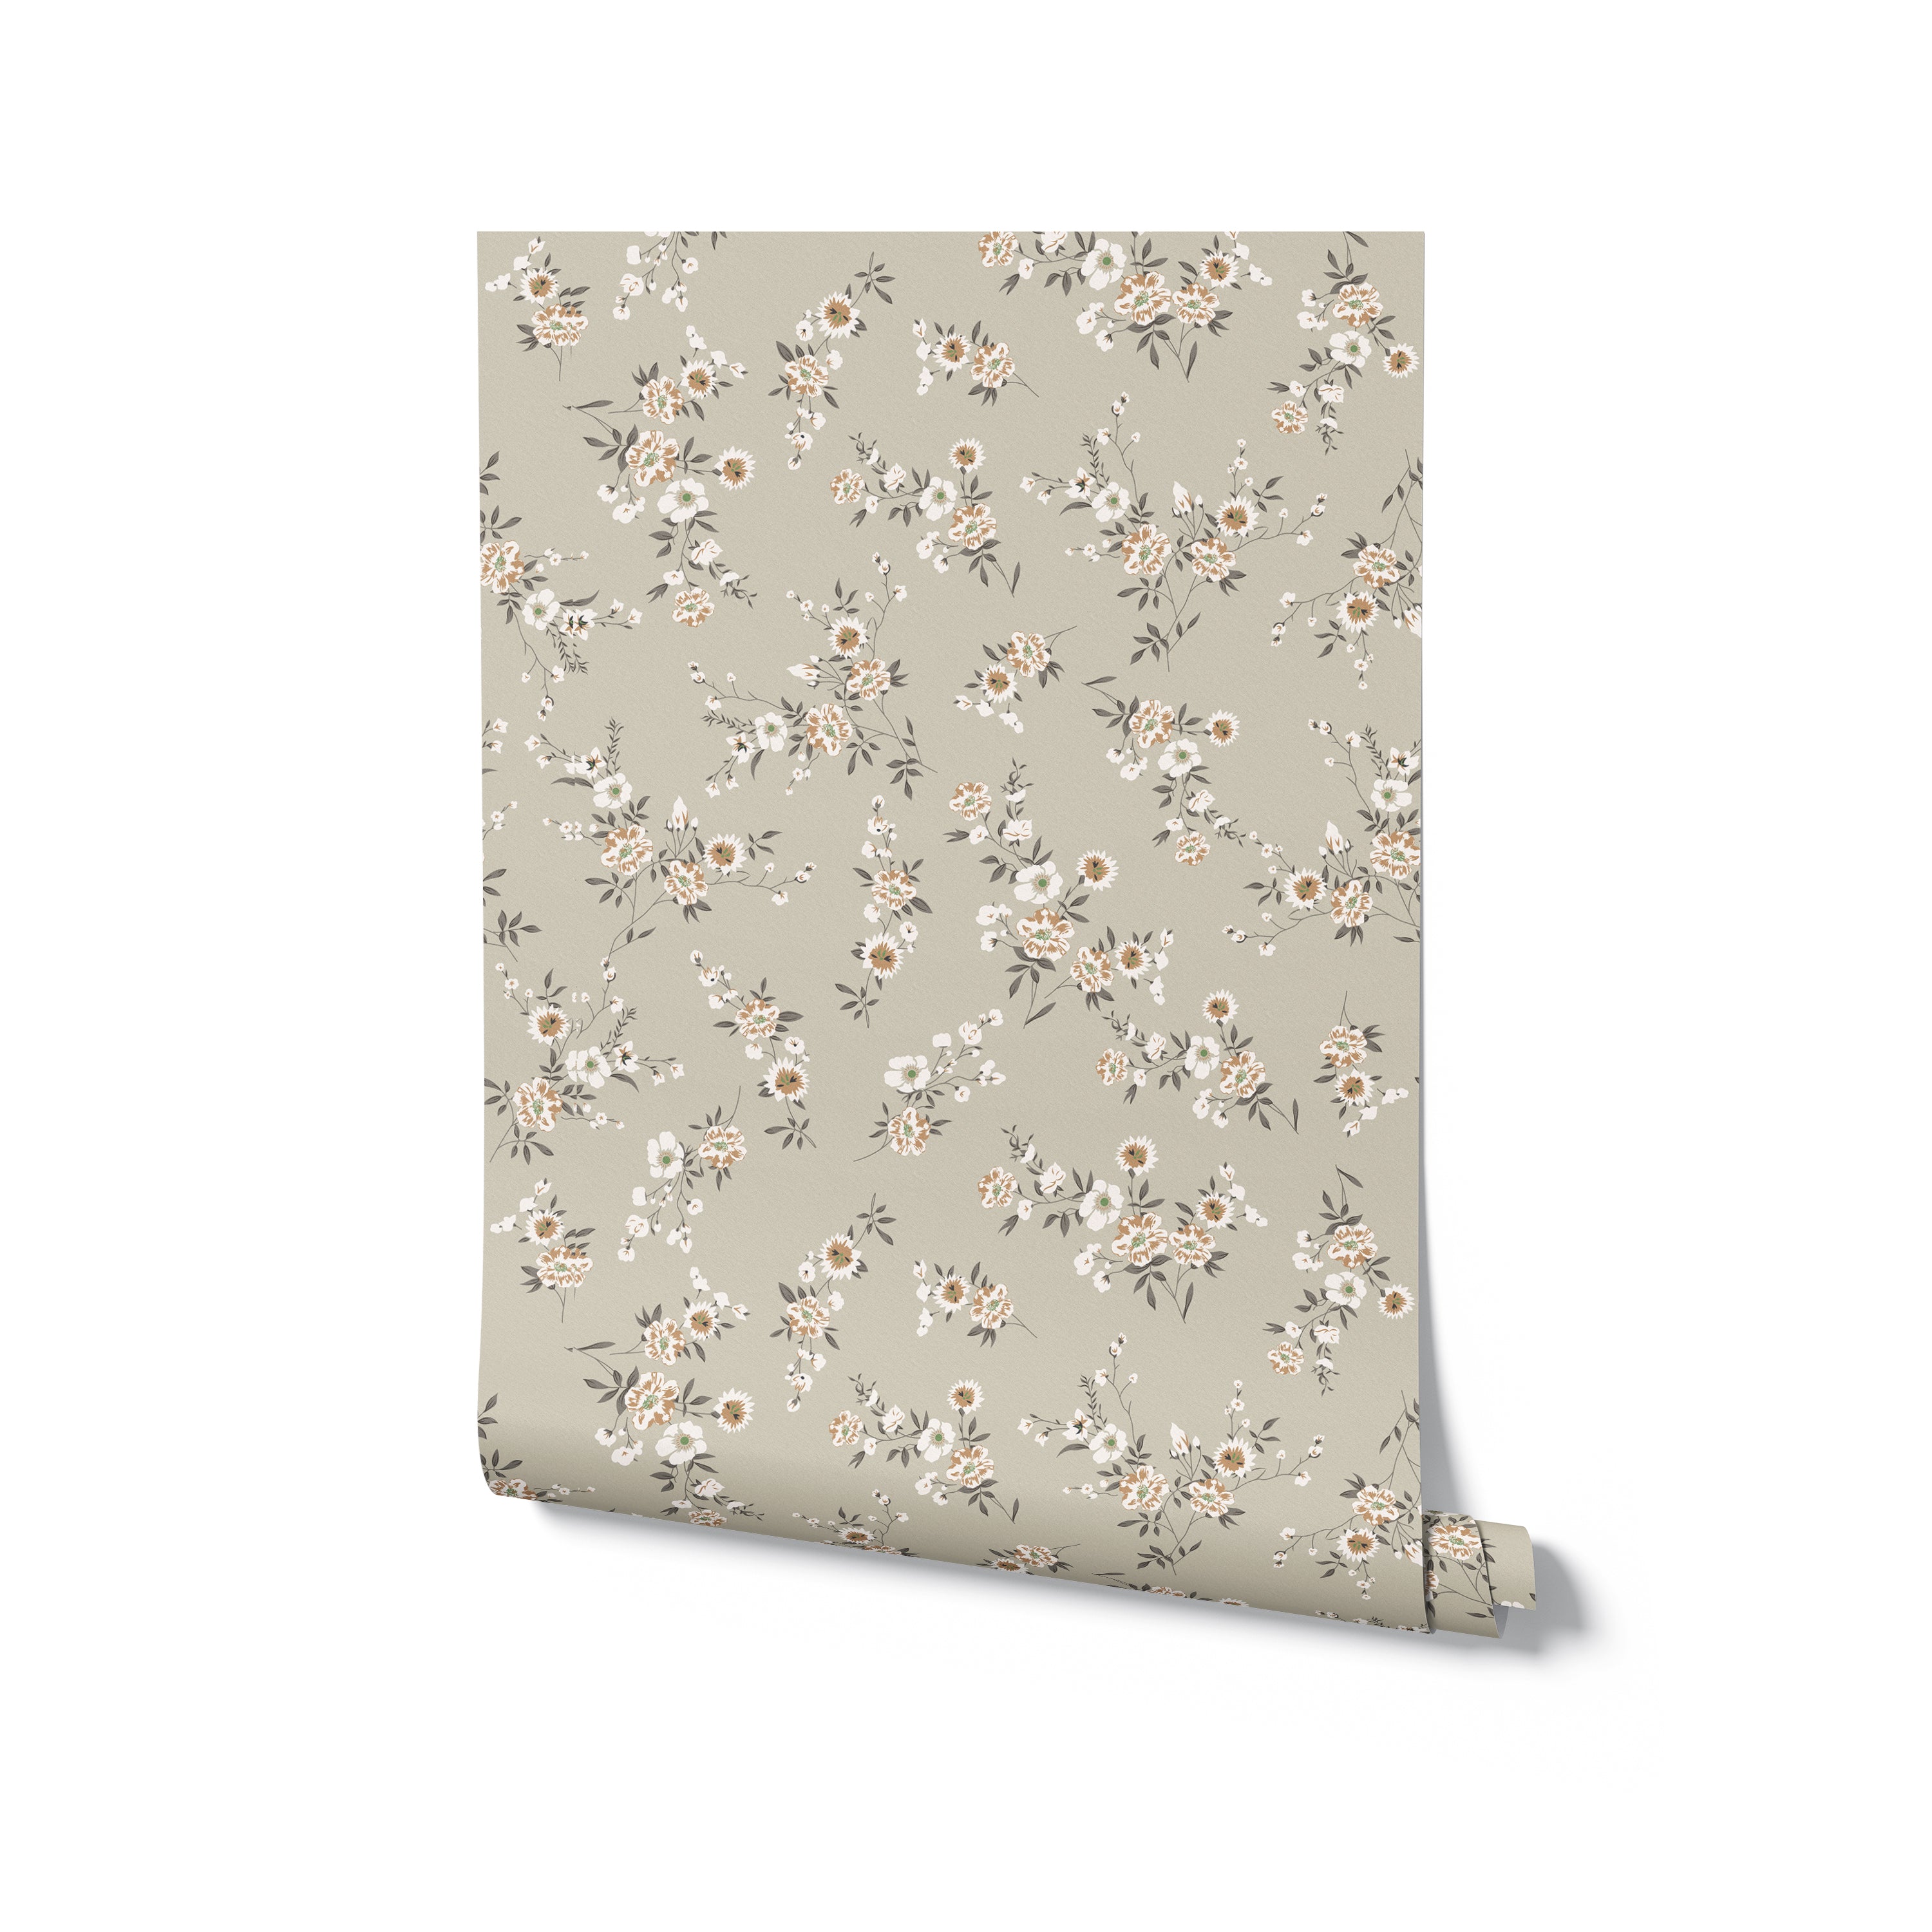 The Classic Floral Wallpaper pattern is showcased in a seamless design. The wallpaper features a tasteful array of flowers in white and tan over an olive green background, conveying a traditional yet fresh aesthetic that's perfect for adding character to any room.